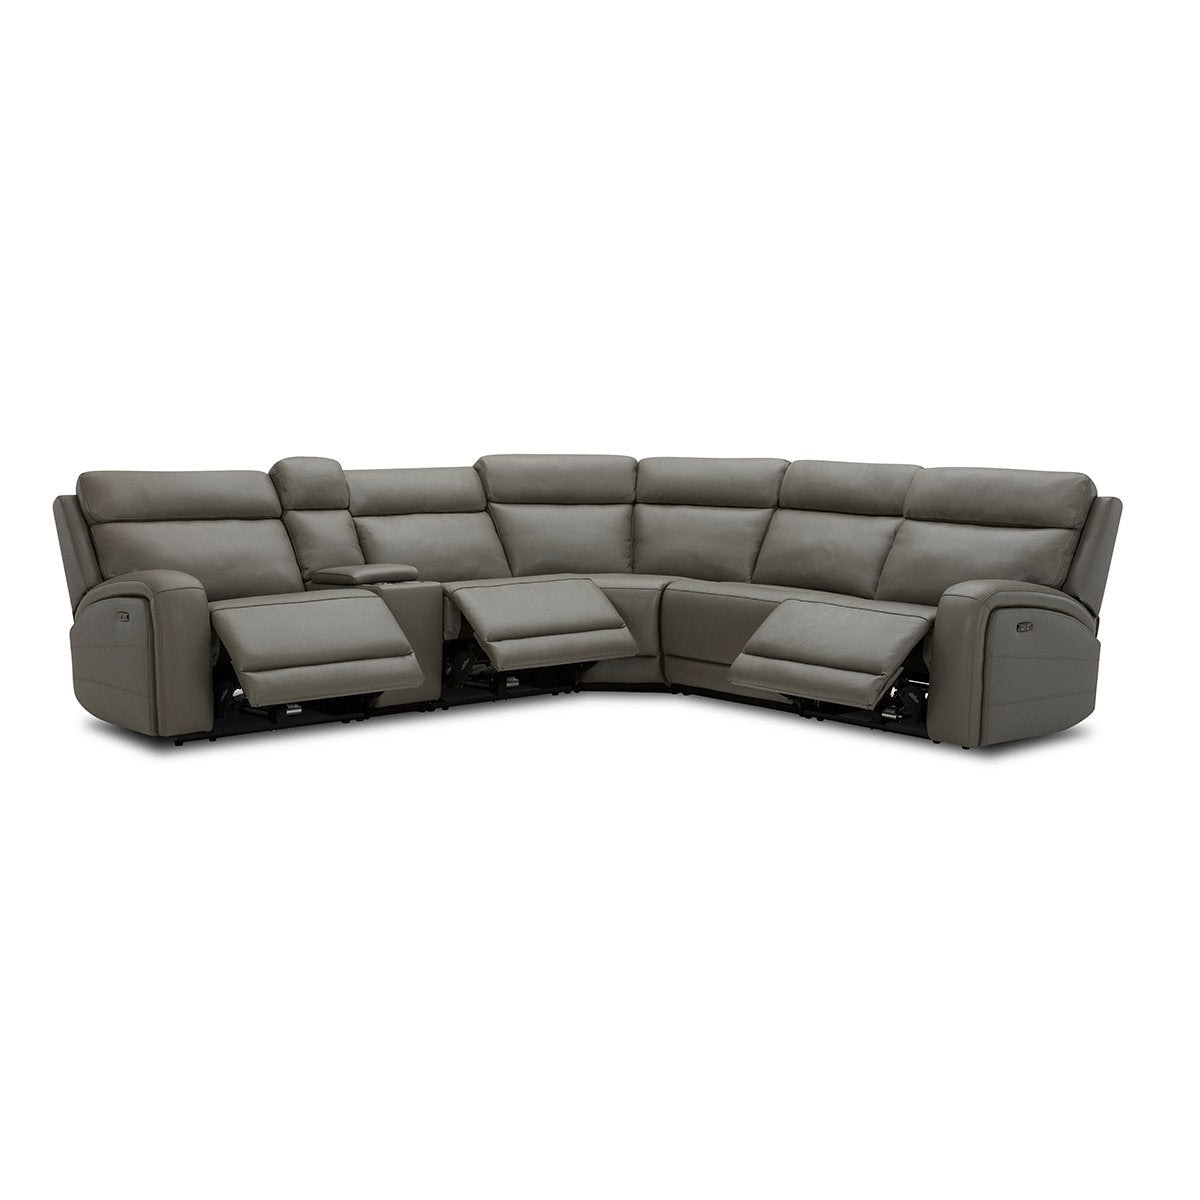 Kuka Paisley Leather Reclining Sectional Sofa with Power Headrests - Signature Retail Stores